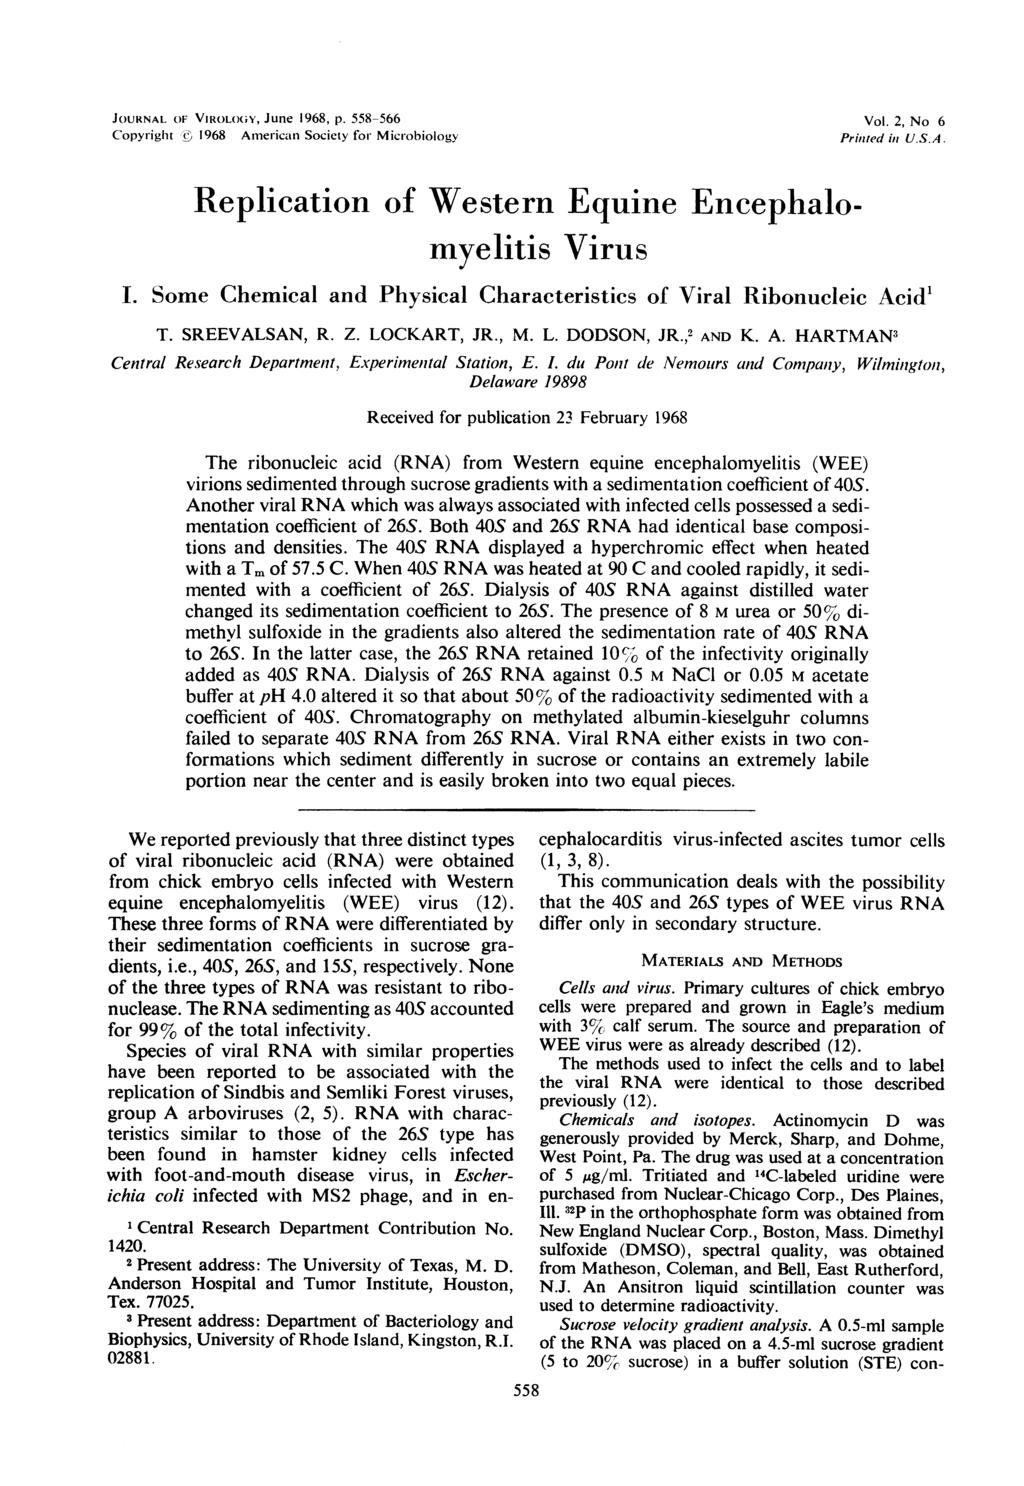 JOURNAL OF VIROLOGY, June 1968, p. 558-566 Copyright 1968 Americaii Society for Microbiology Vol. 2, No 6 Pritited in U.S.A. Replication of Western Equine Encephalomyelitis Virus I.